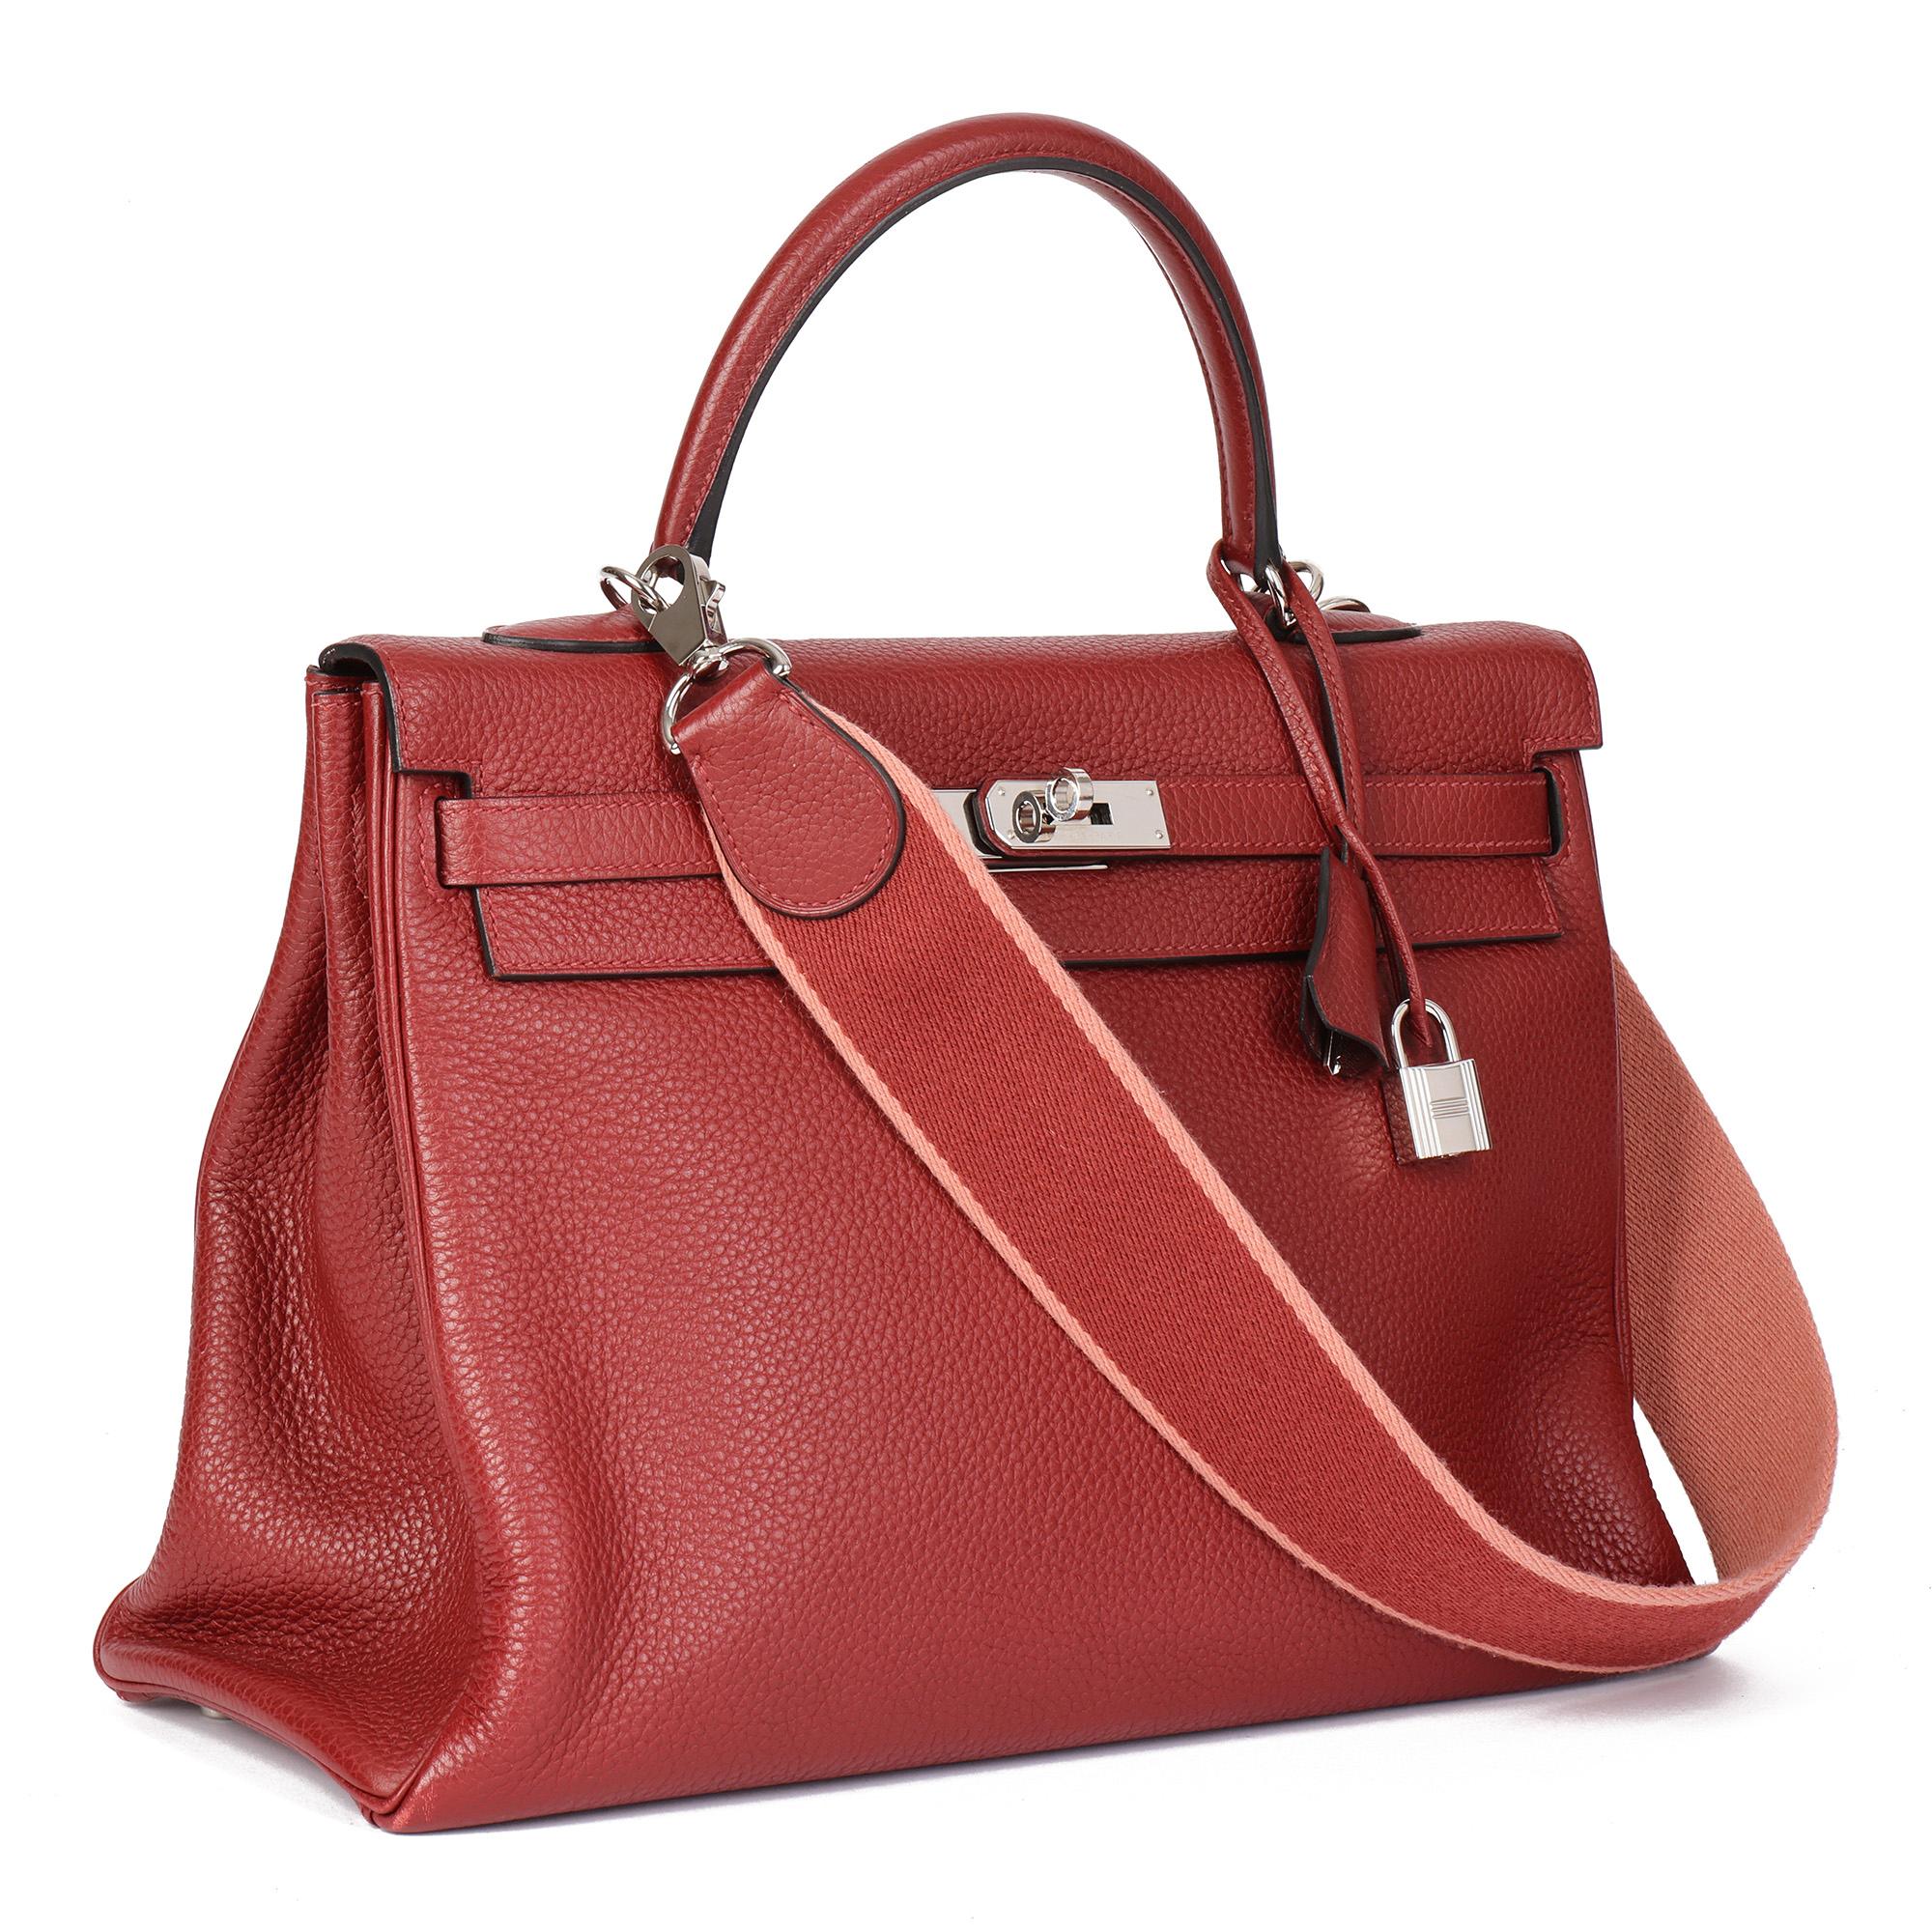 HERMÈS
Rouge H Clemence Leather Amazone Kelly 35cm Retourne

Serial Number: [Q]
Age (Circa): 2013
Accompanied By: Hermès Dust Bag, Padlock, Keys, Clochette, Amazone Shoulder Strap
Authenticity Details: Date Stamp (Made in France)
Gender: